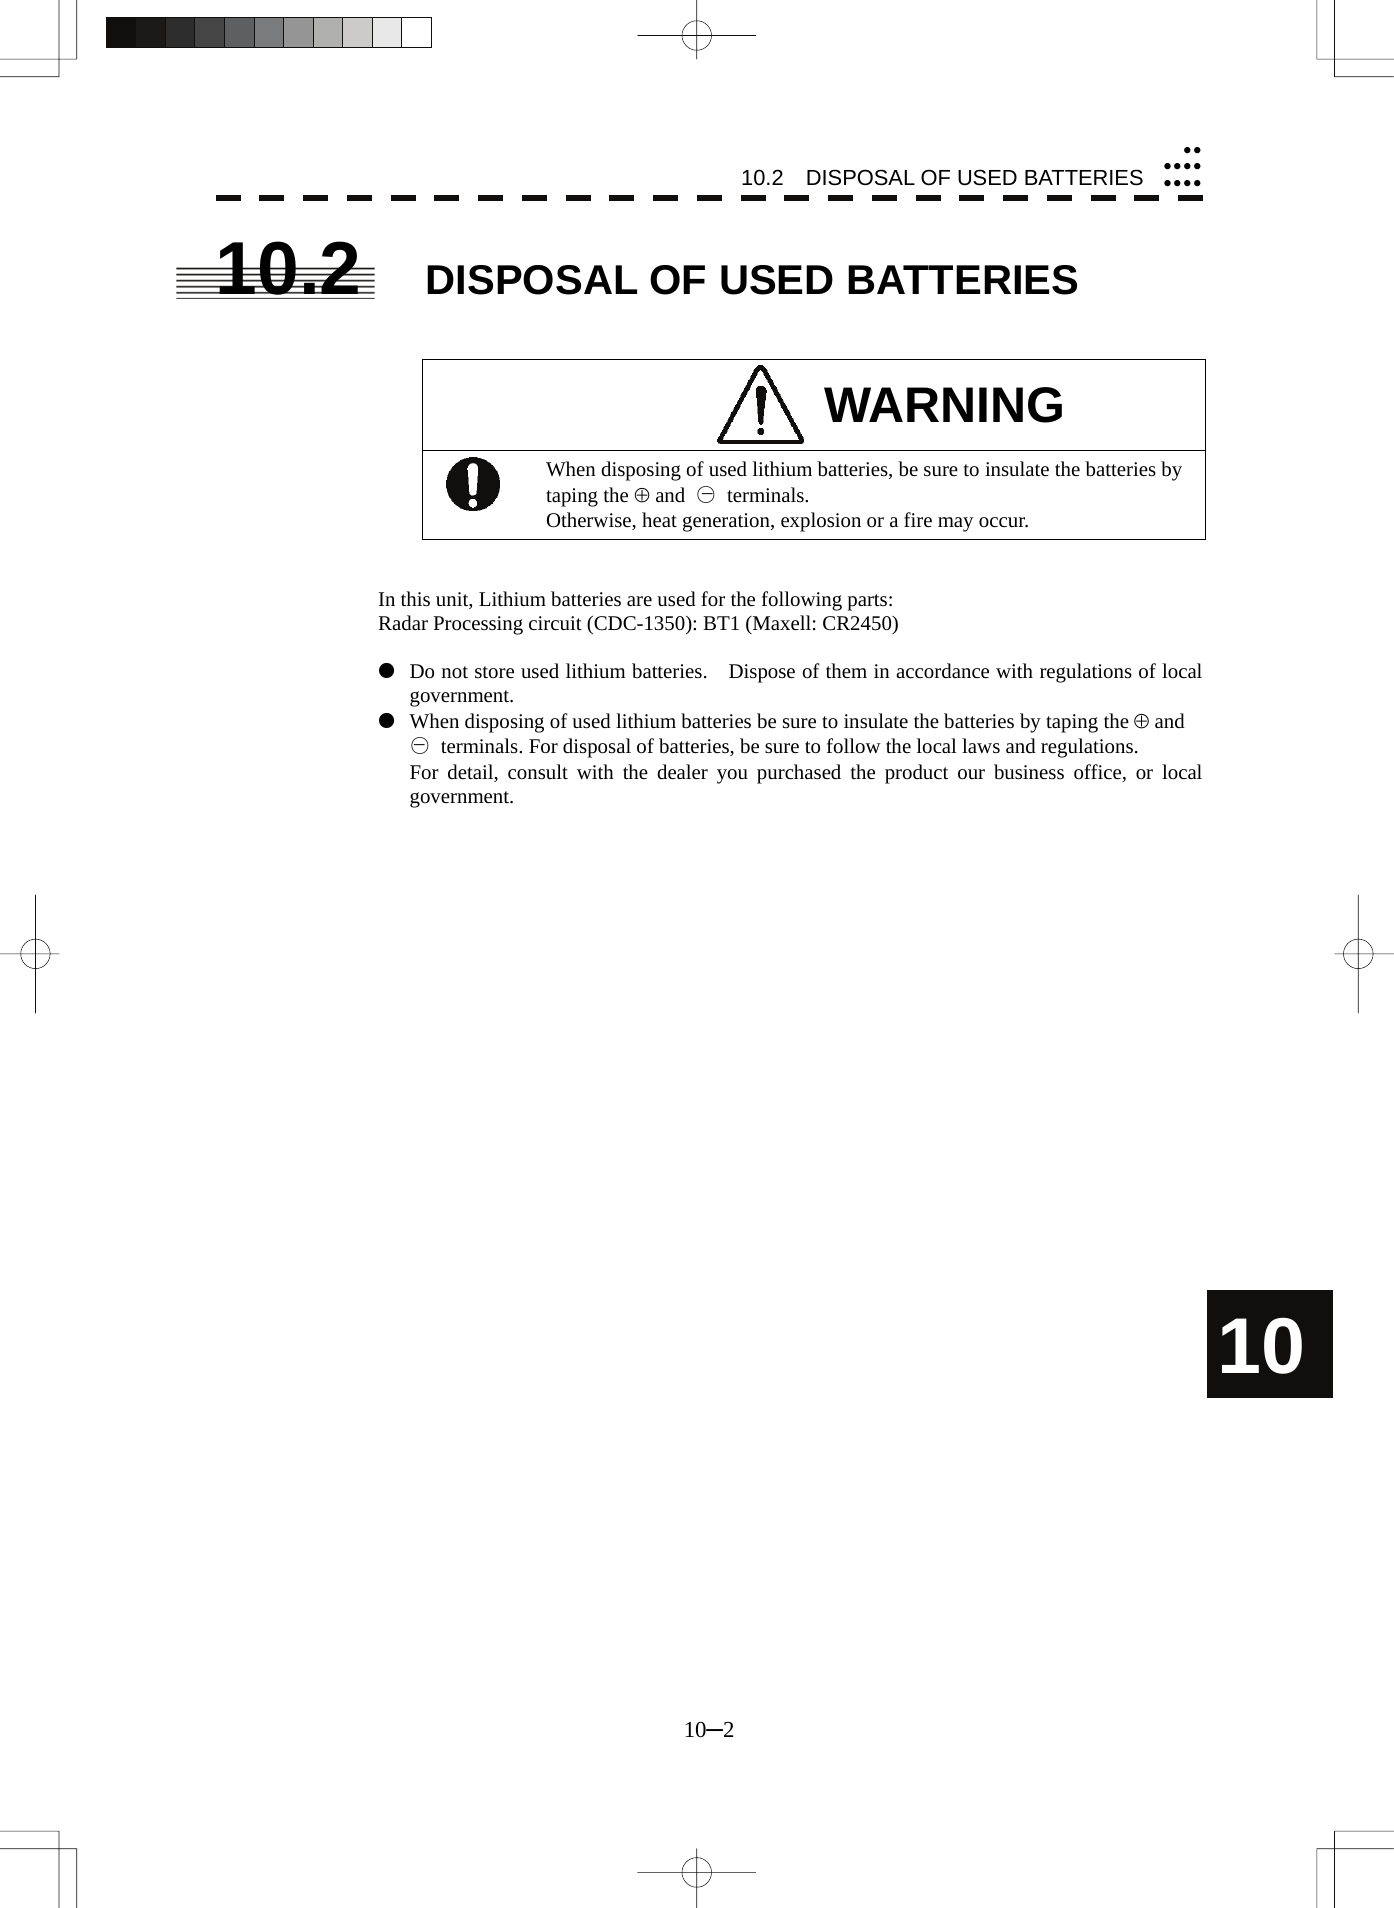 10.2    DISPOSAL OF USED BATTERIES 10─2 10yyyyyyyyyy10.2  DISPOSAL OF USED BATTERIES   WARNING  When disposing of used lithium batteries, be sure to insulate the batteries by taping the ⊕ and  ○ terminals. Otherwise, heat generation, explosion or a fire may occur.   In this unit, Lithium batteries are used for the following parts: Radar Processing circuit (CDC-1350): BT1 (Maxell: CR2450)  z  Do not store used lithium batteries.    Dispose of them in accordance with regulations of local government. z  When disposing of used lithium batteries be sure to insulate the batteries by taping the ⊕ and   ○  terminals. For disposal of batteries, be sure to follow the local laws and regulations.   For detail, consult with the dealer you purchased the product our business office, or local government.     −− 